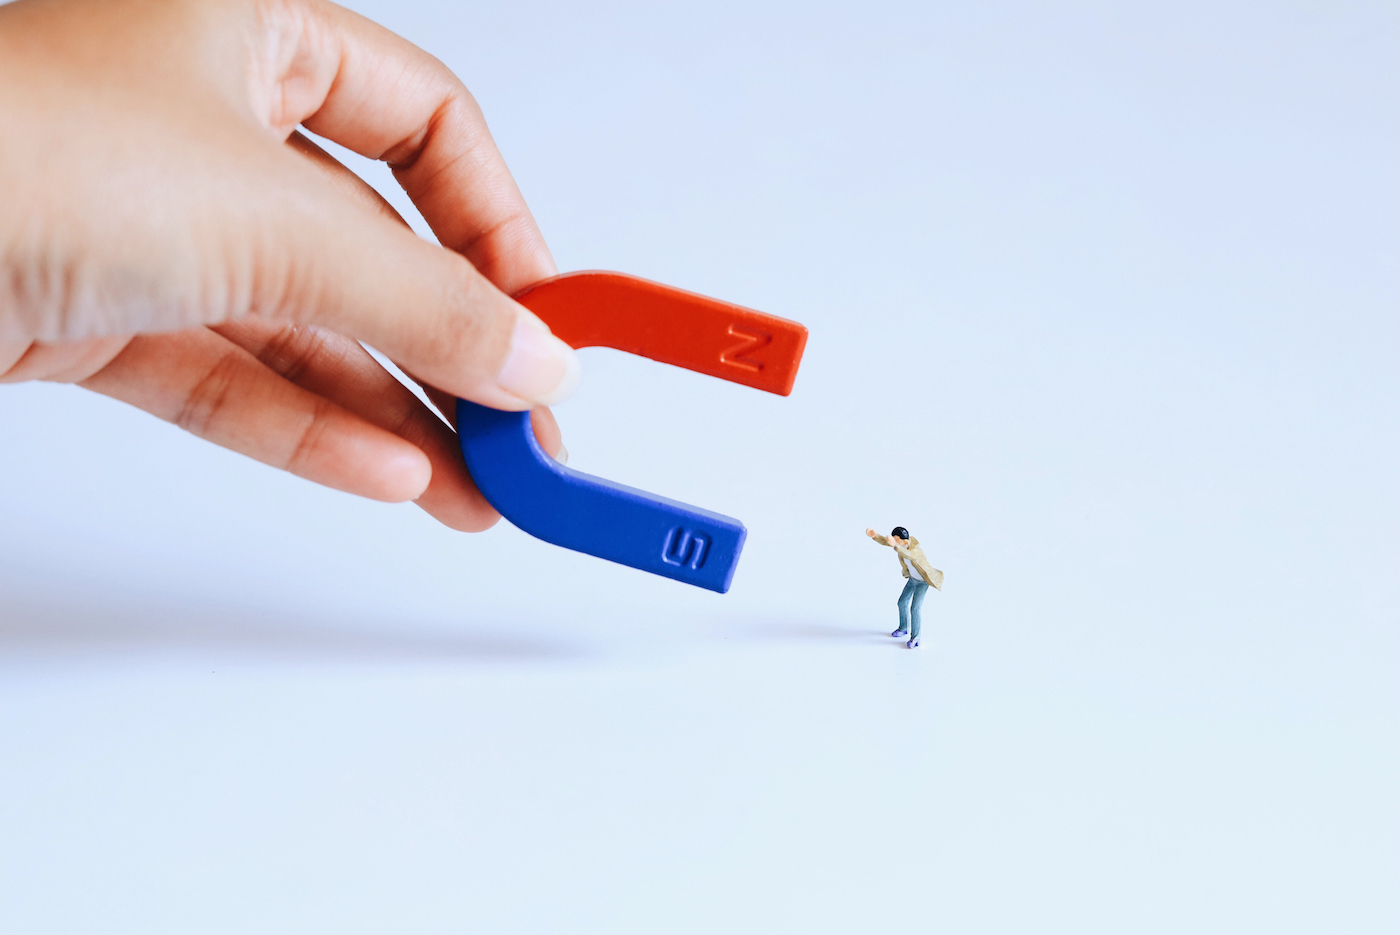 Cropped Hand Holding Magnet Toy Against White Background